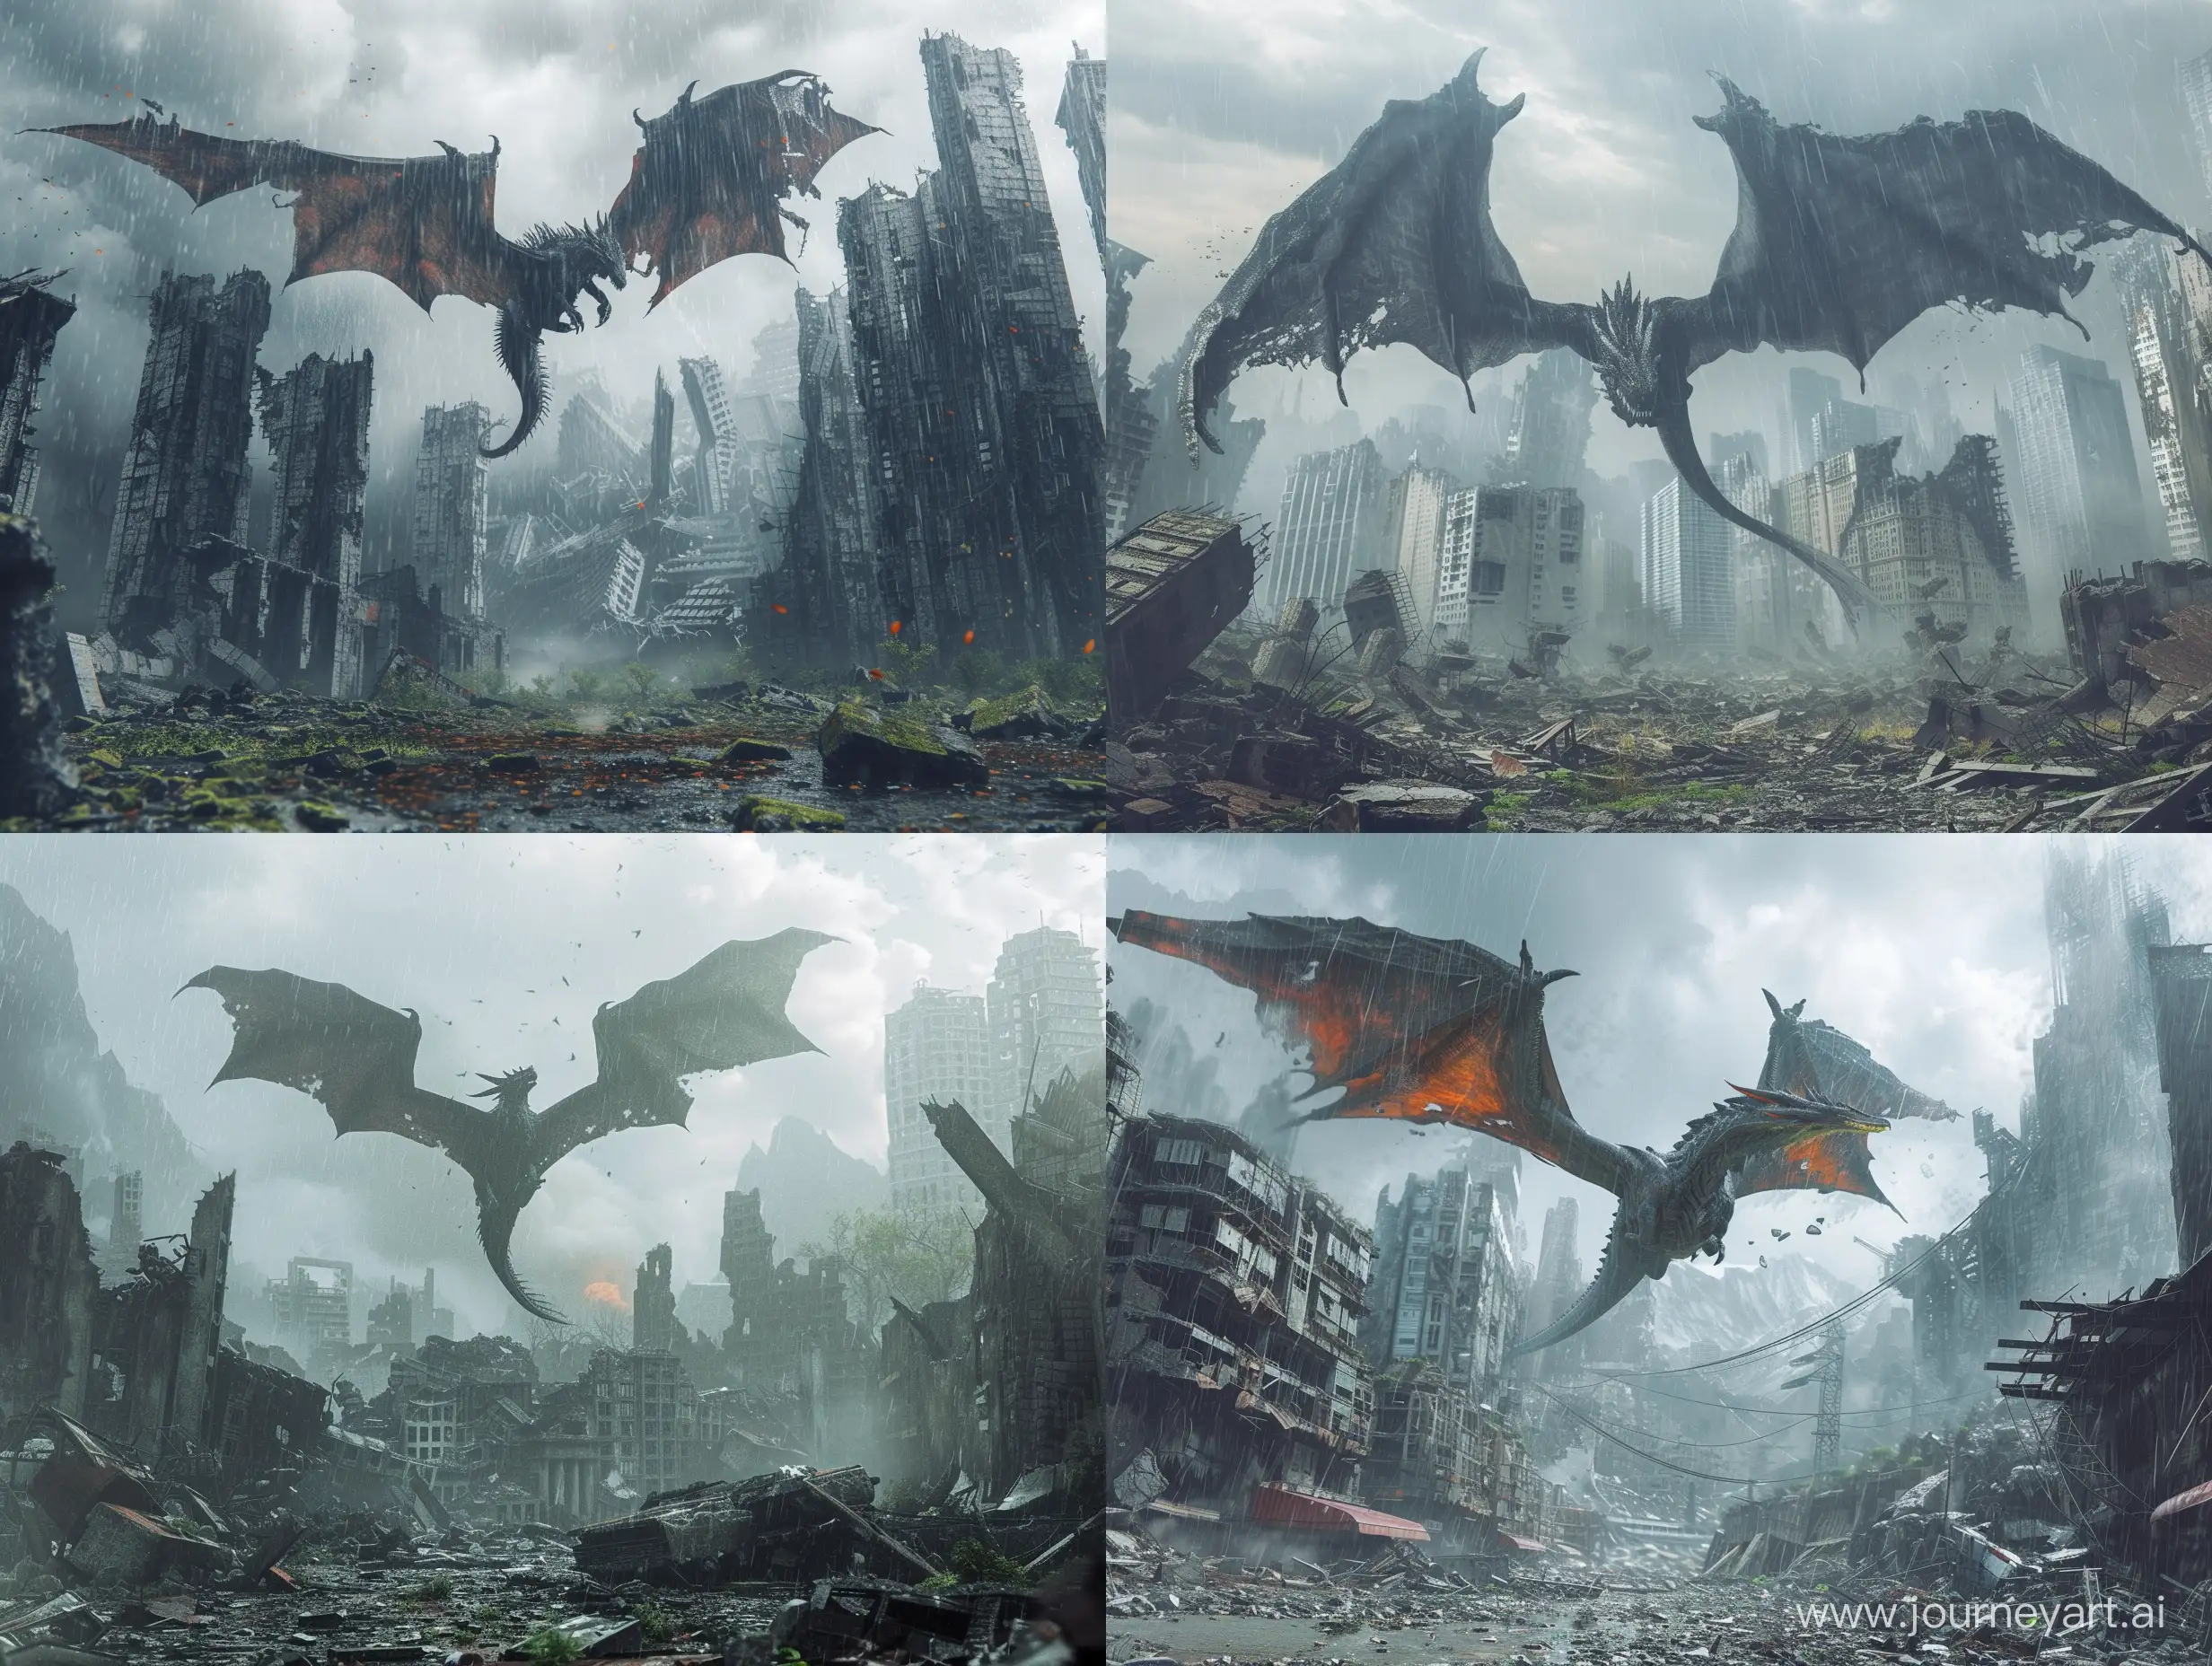 A realistic dragon hovers over the ruins of a modern city, plunged into ruins, buildings are destroyed, everything is covered in ash, a post-apocalypse has arrived. The sky is covered with clouds and it is raining. The scene is shot from the ground, the depressive atmosphere of extinct humanity.